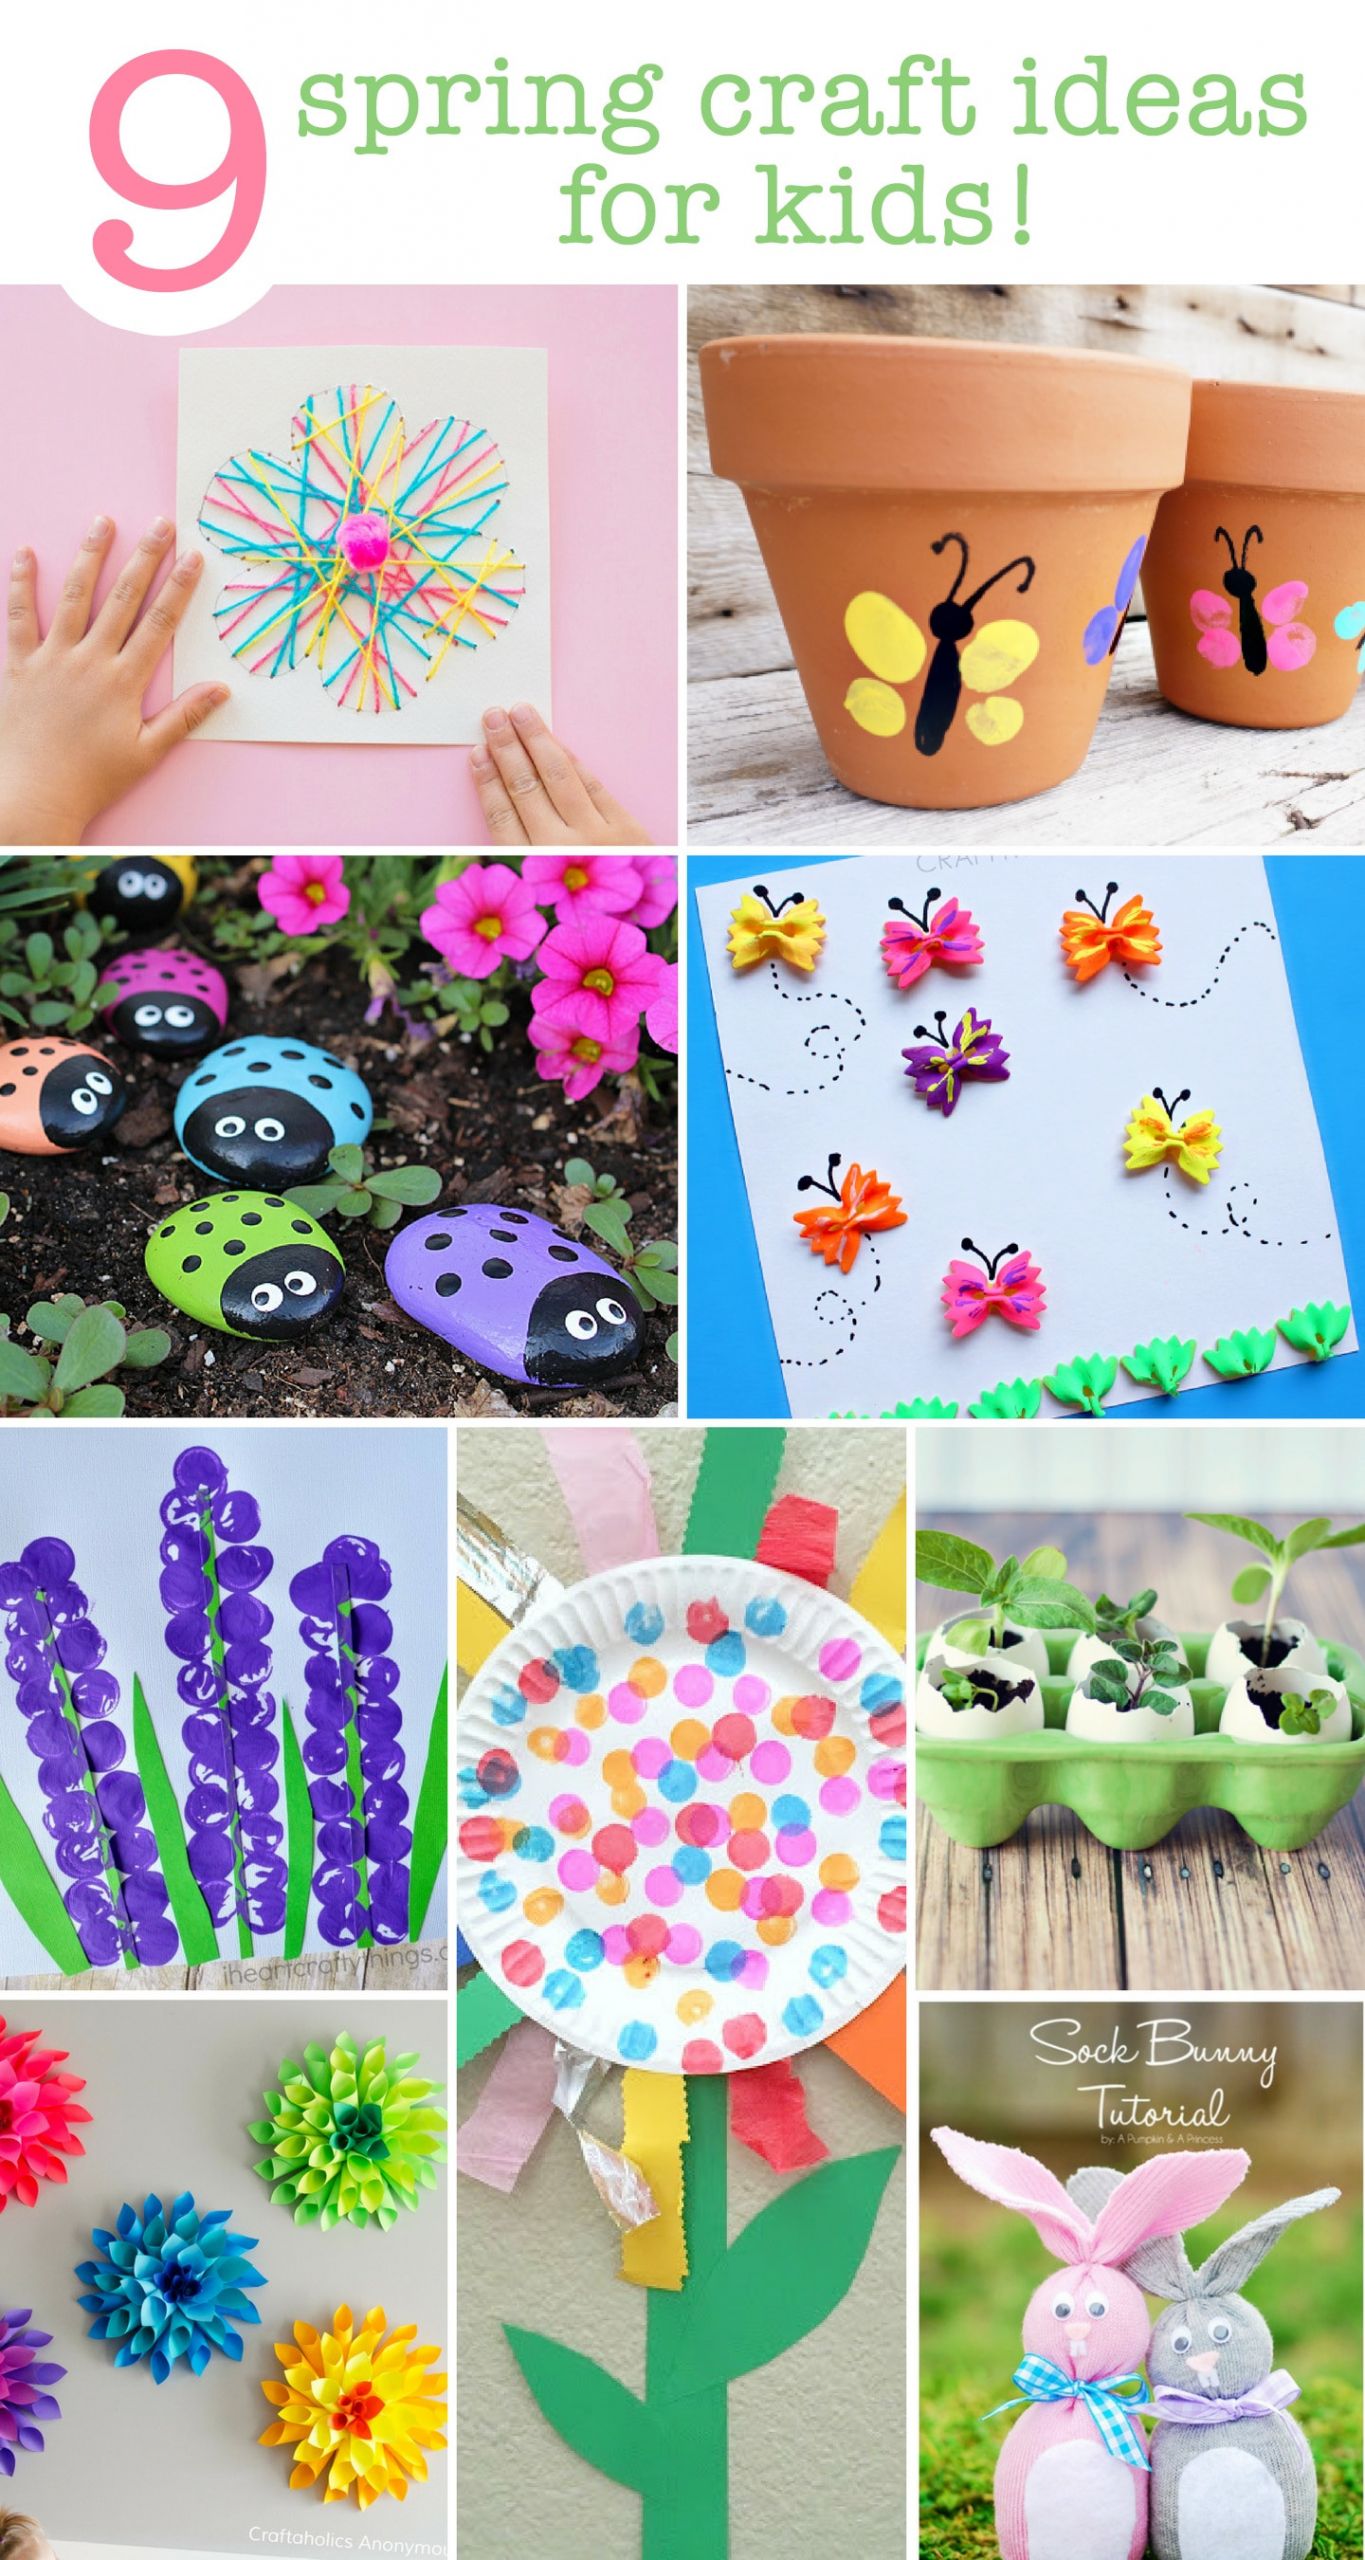 Toddlers Crafts For Spring
 9 Spring Craft Ideas For The Kids